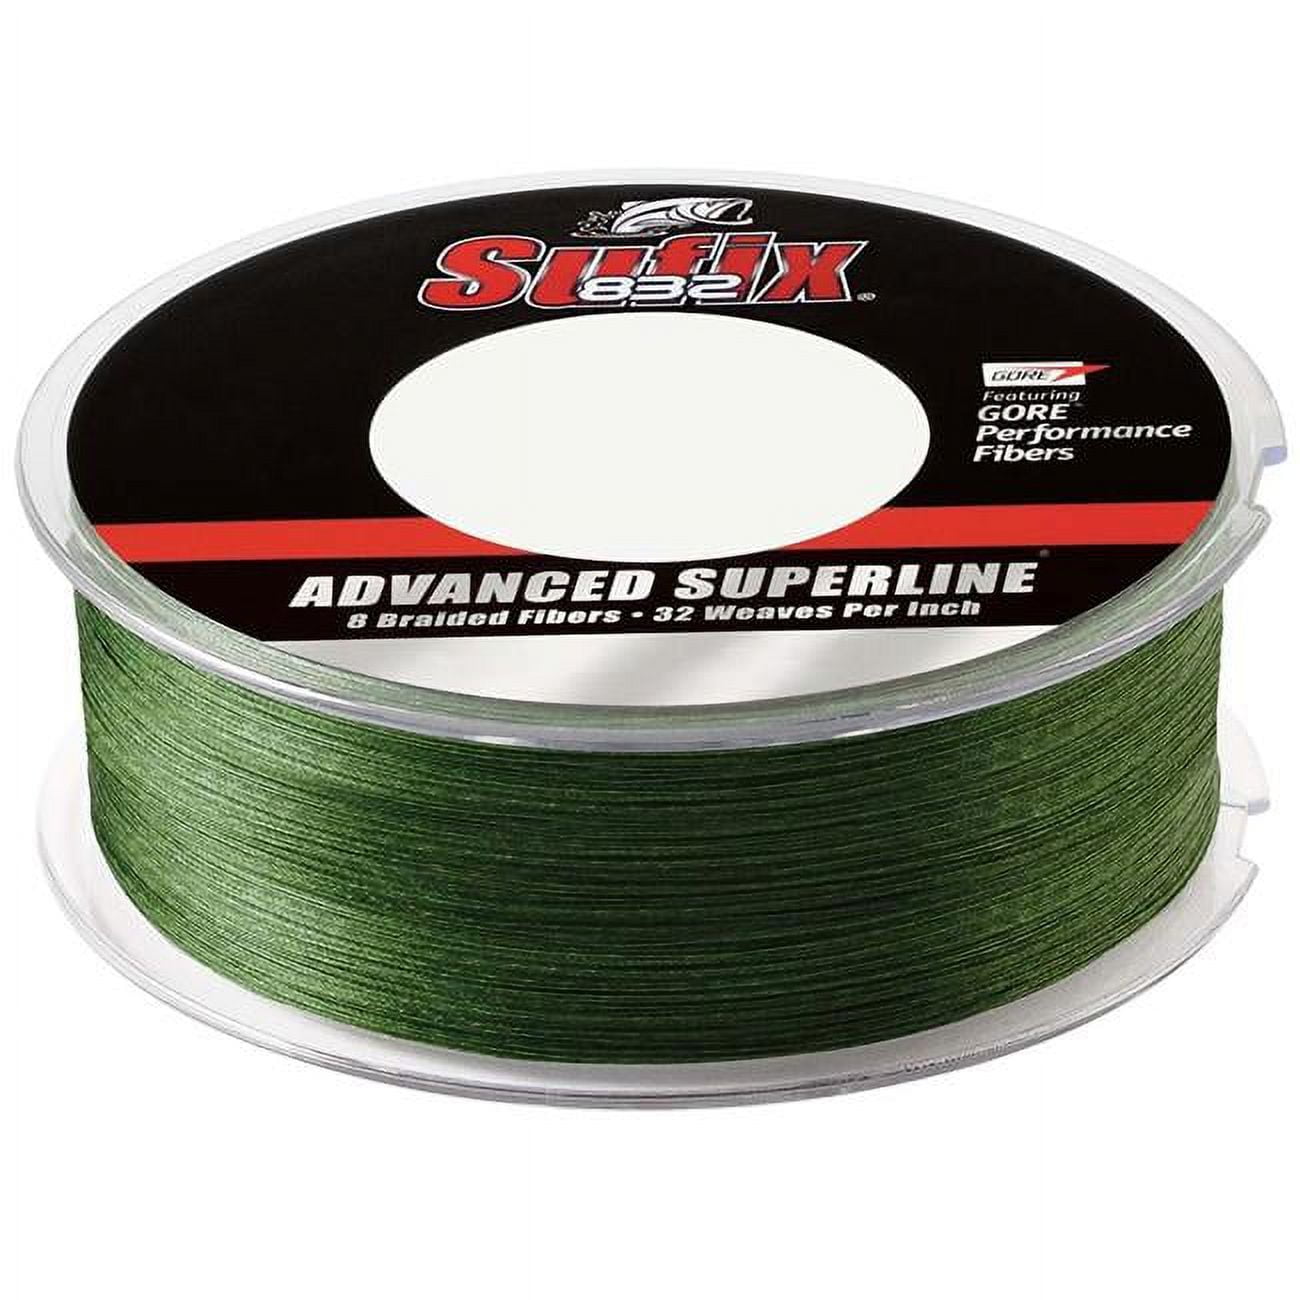  POWER PRO Spectra Fiber Braided Fishing Line, Hi-Vis Yellow,  1500YD/100LB : Superbraid And Braided Fishing Line : Sports & Outdoors